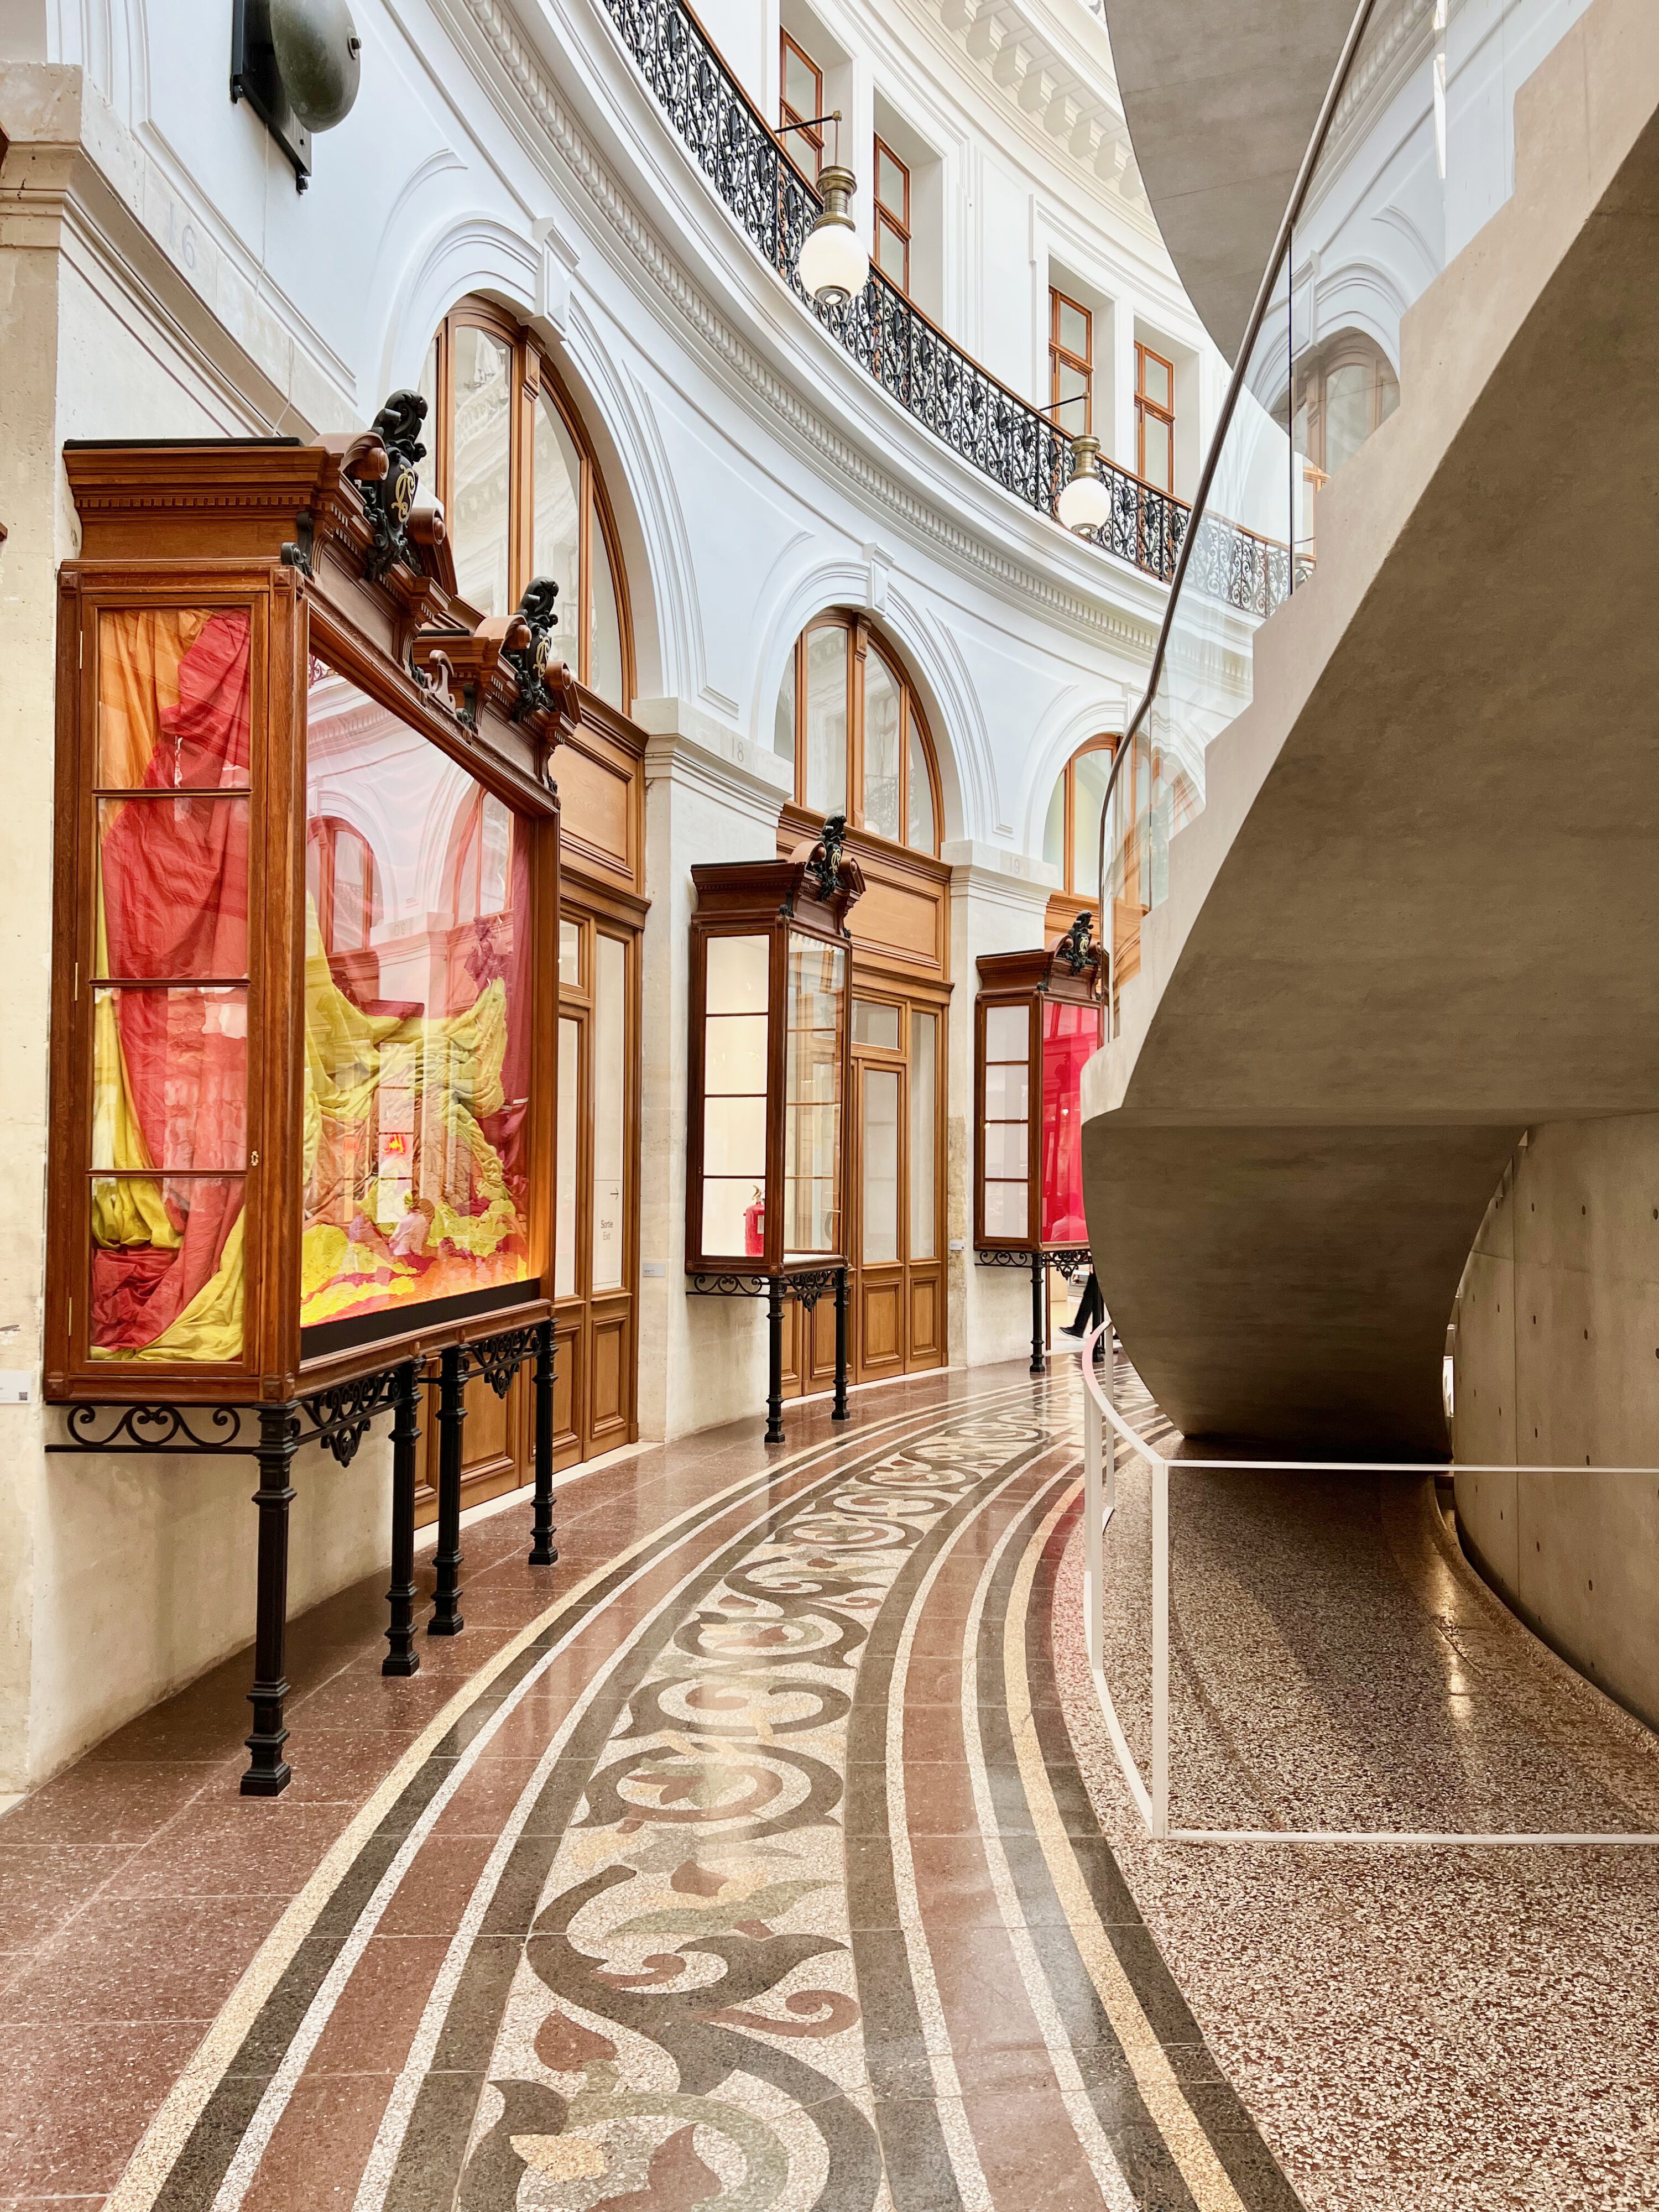 the Pinault Collection at the Bourse de Commerce is a stunning example of contemporary art and historic preservation